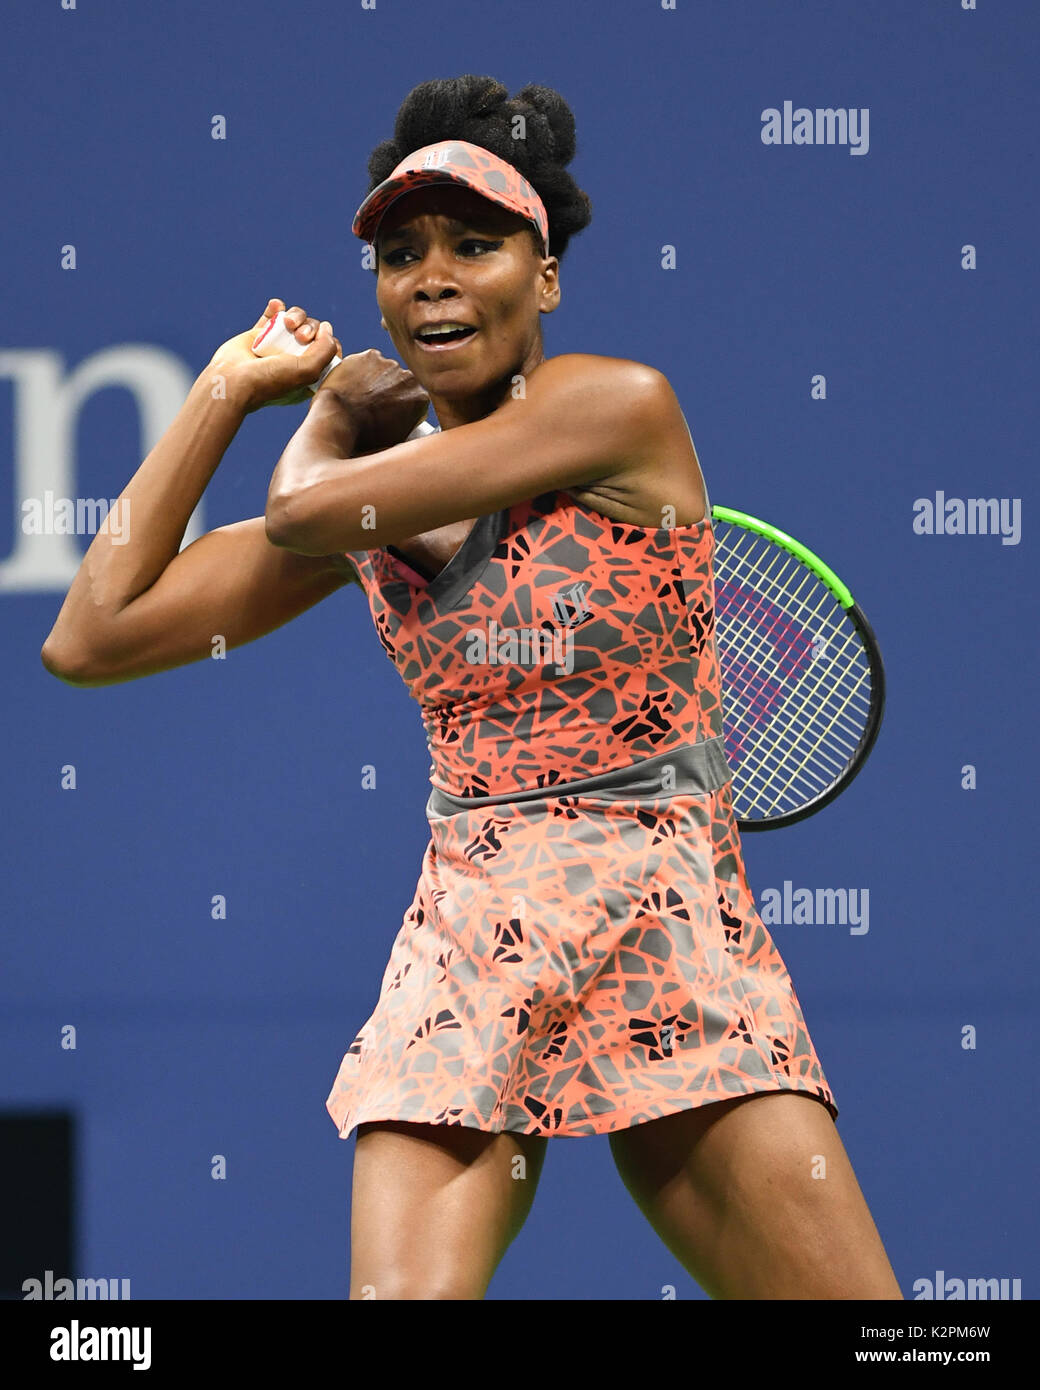 New York, USA. 30th Aug, 2017. Venus Williams Vs Oceane Dodin on Arthur Ashe Stadium during the US Open at the USTA Billie Jean King National Tennis Center on August 30, 2017 in Flushing Queens. Credit: mpi04/MediaPunch ***NO NY DAILIES*** Credit: MediaPunch Inc/Alamy Live News Stock Photo